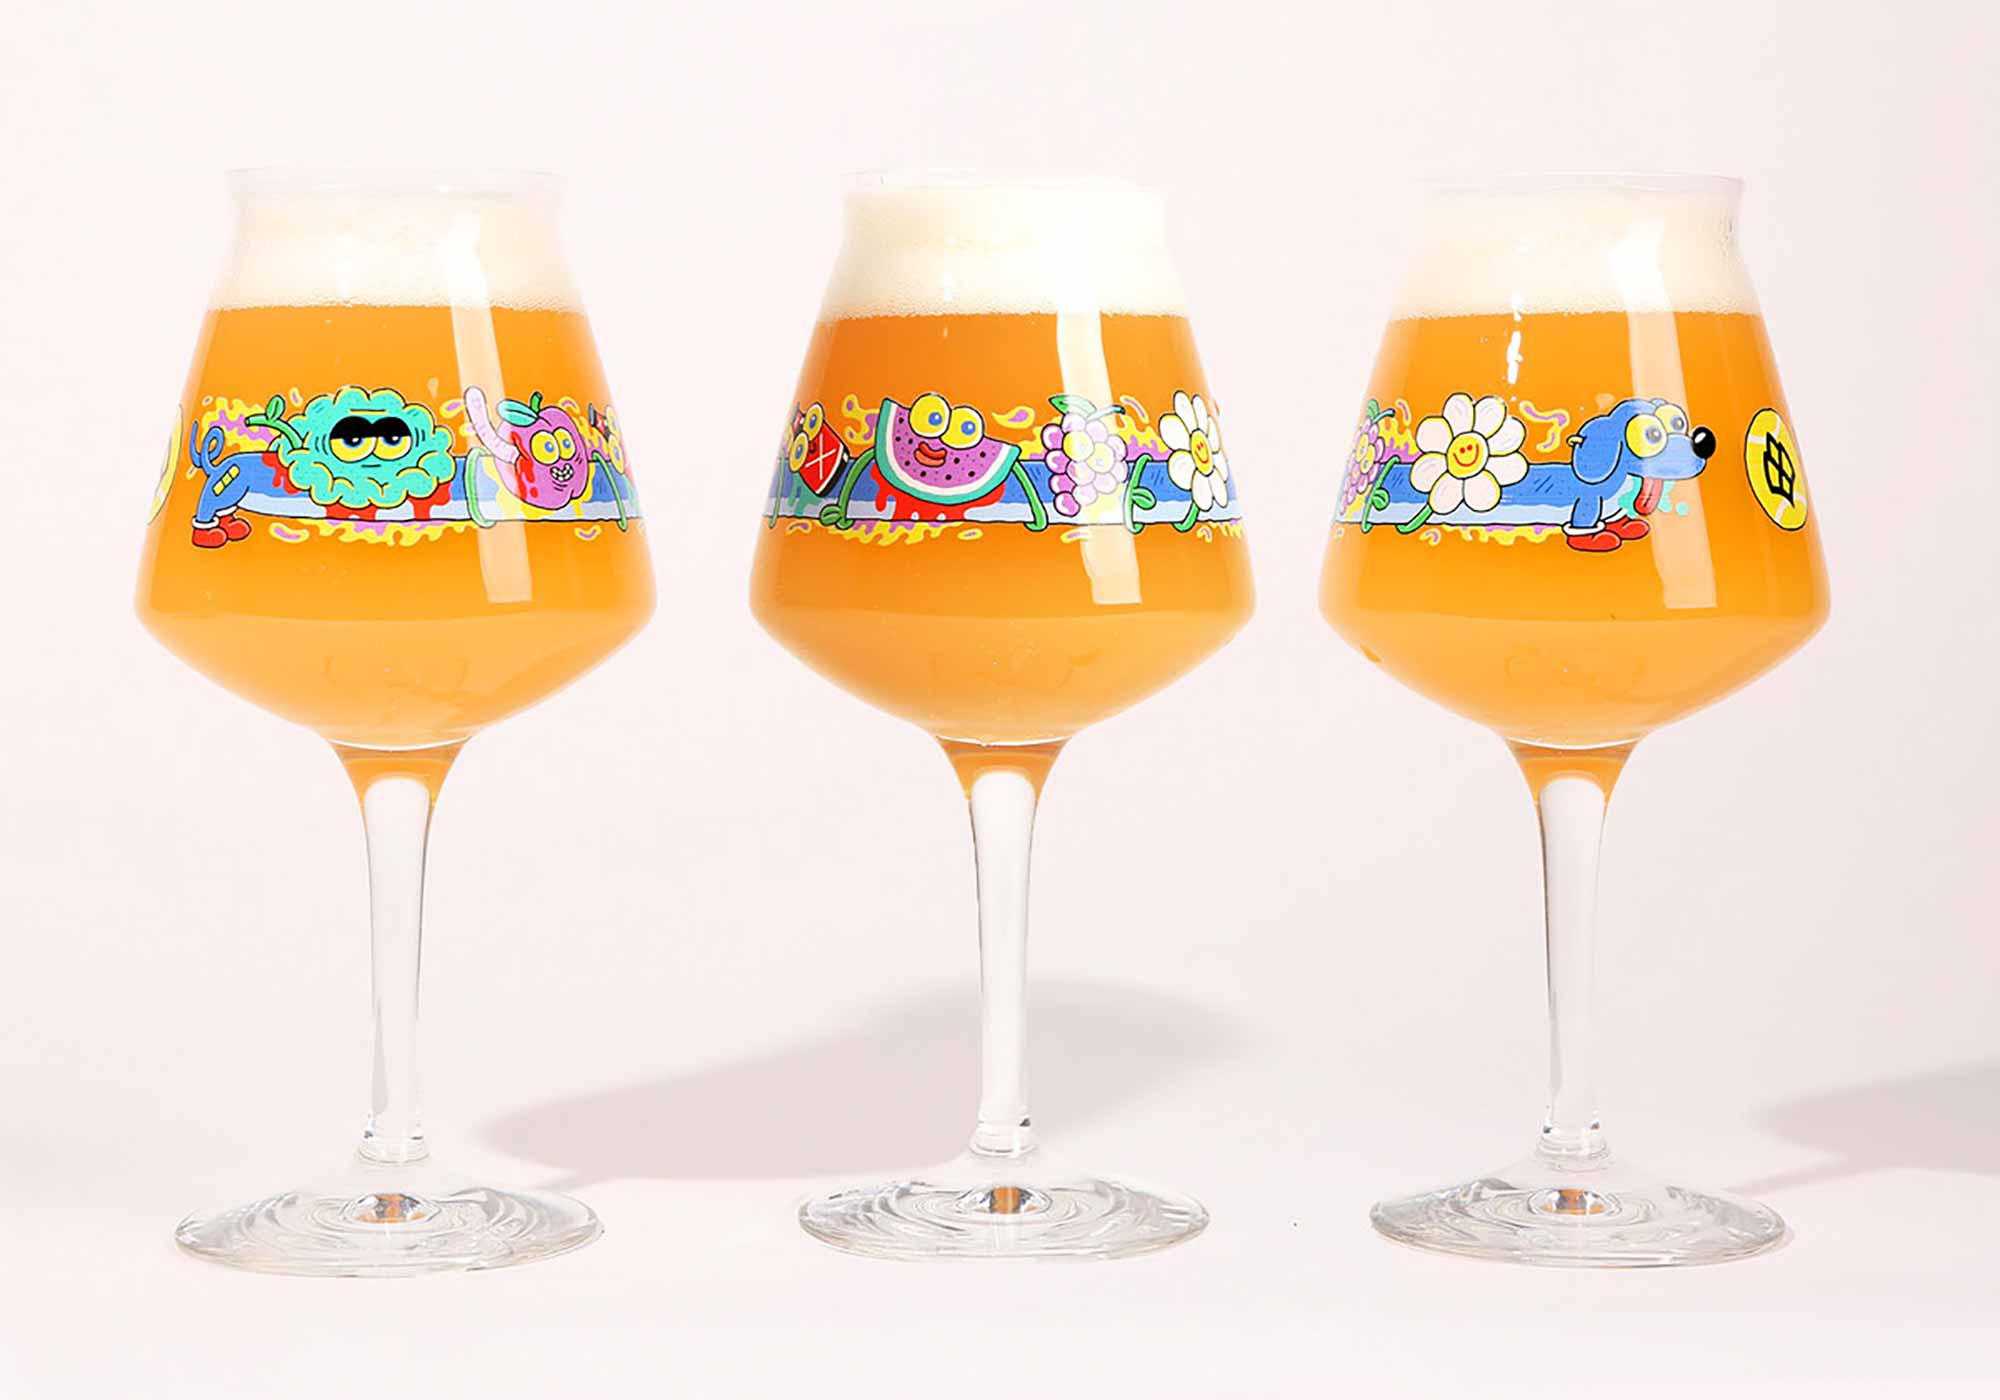 The amazing nucleation beer glass, Beer glass types